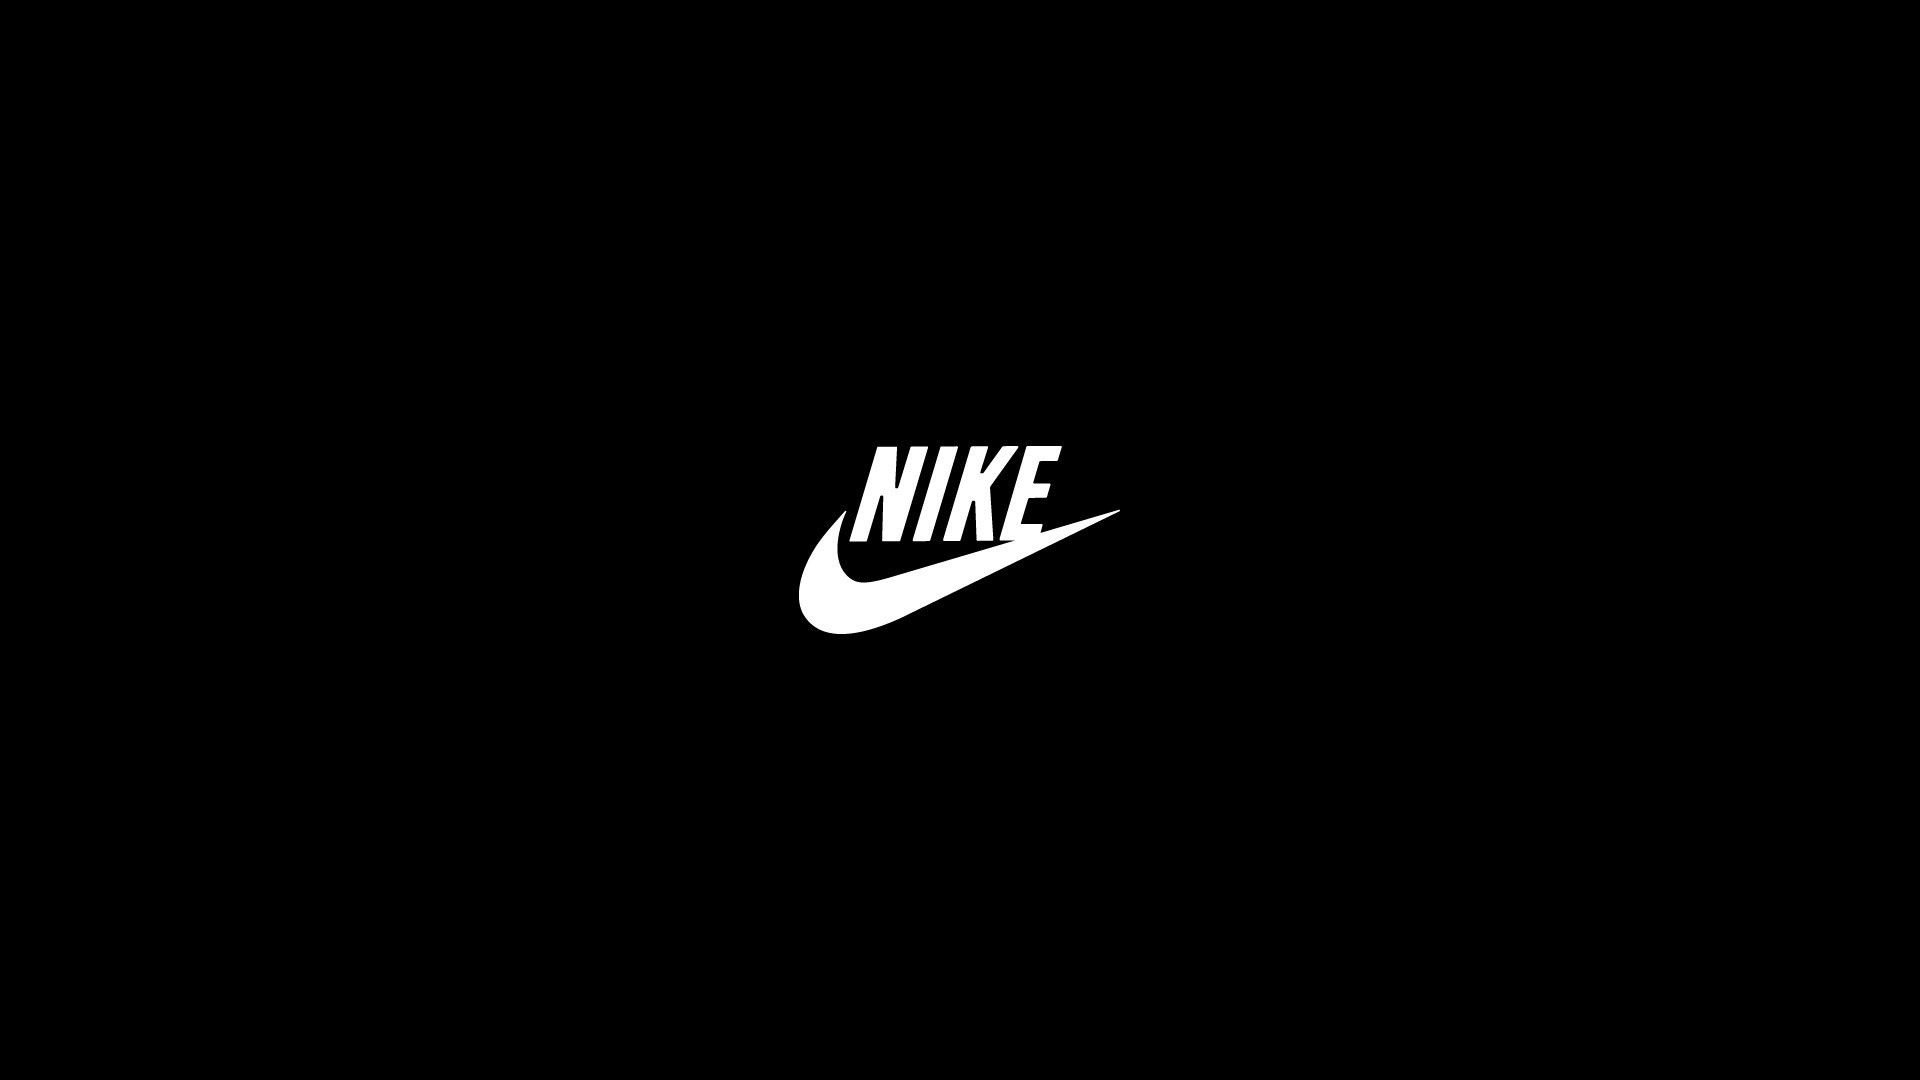 Pin by Nukat on Walpaperz  Cool nike wallpapers Nike wallpaper Travis  scott iphone wallpaper  Nike wallpaper Travis scott wallpapers Cool nike  wallpapers